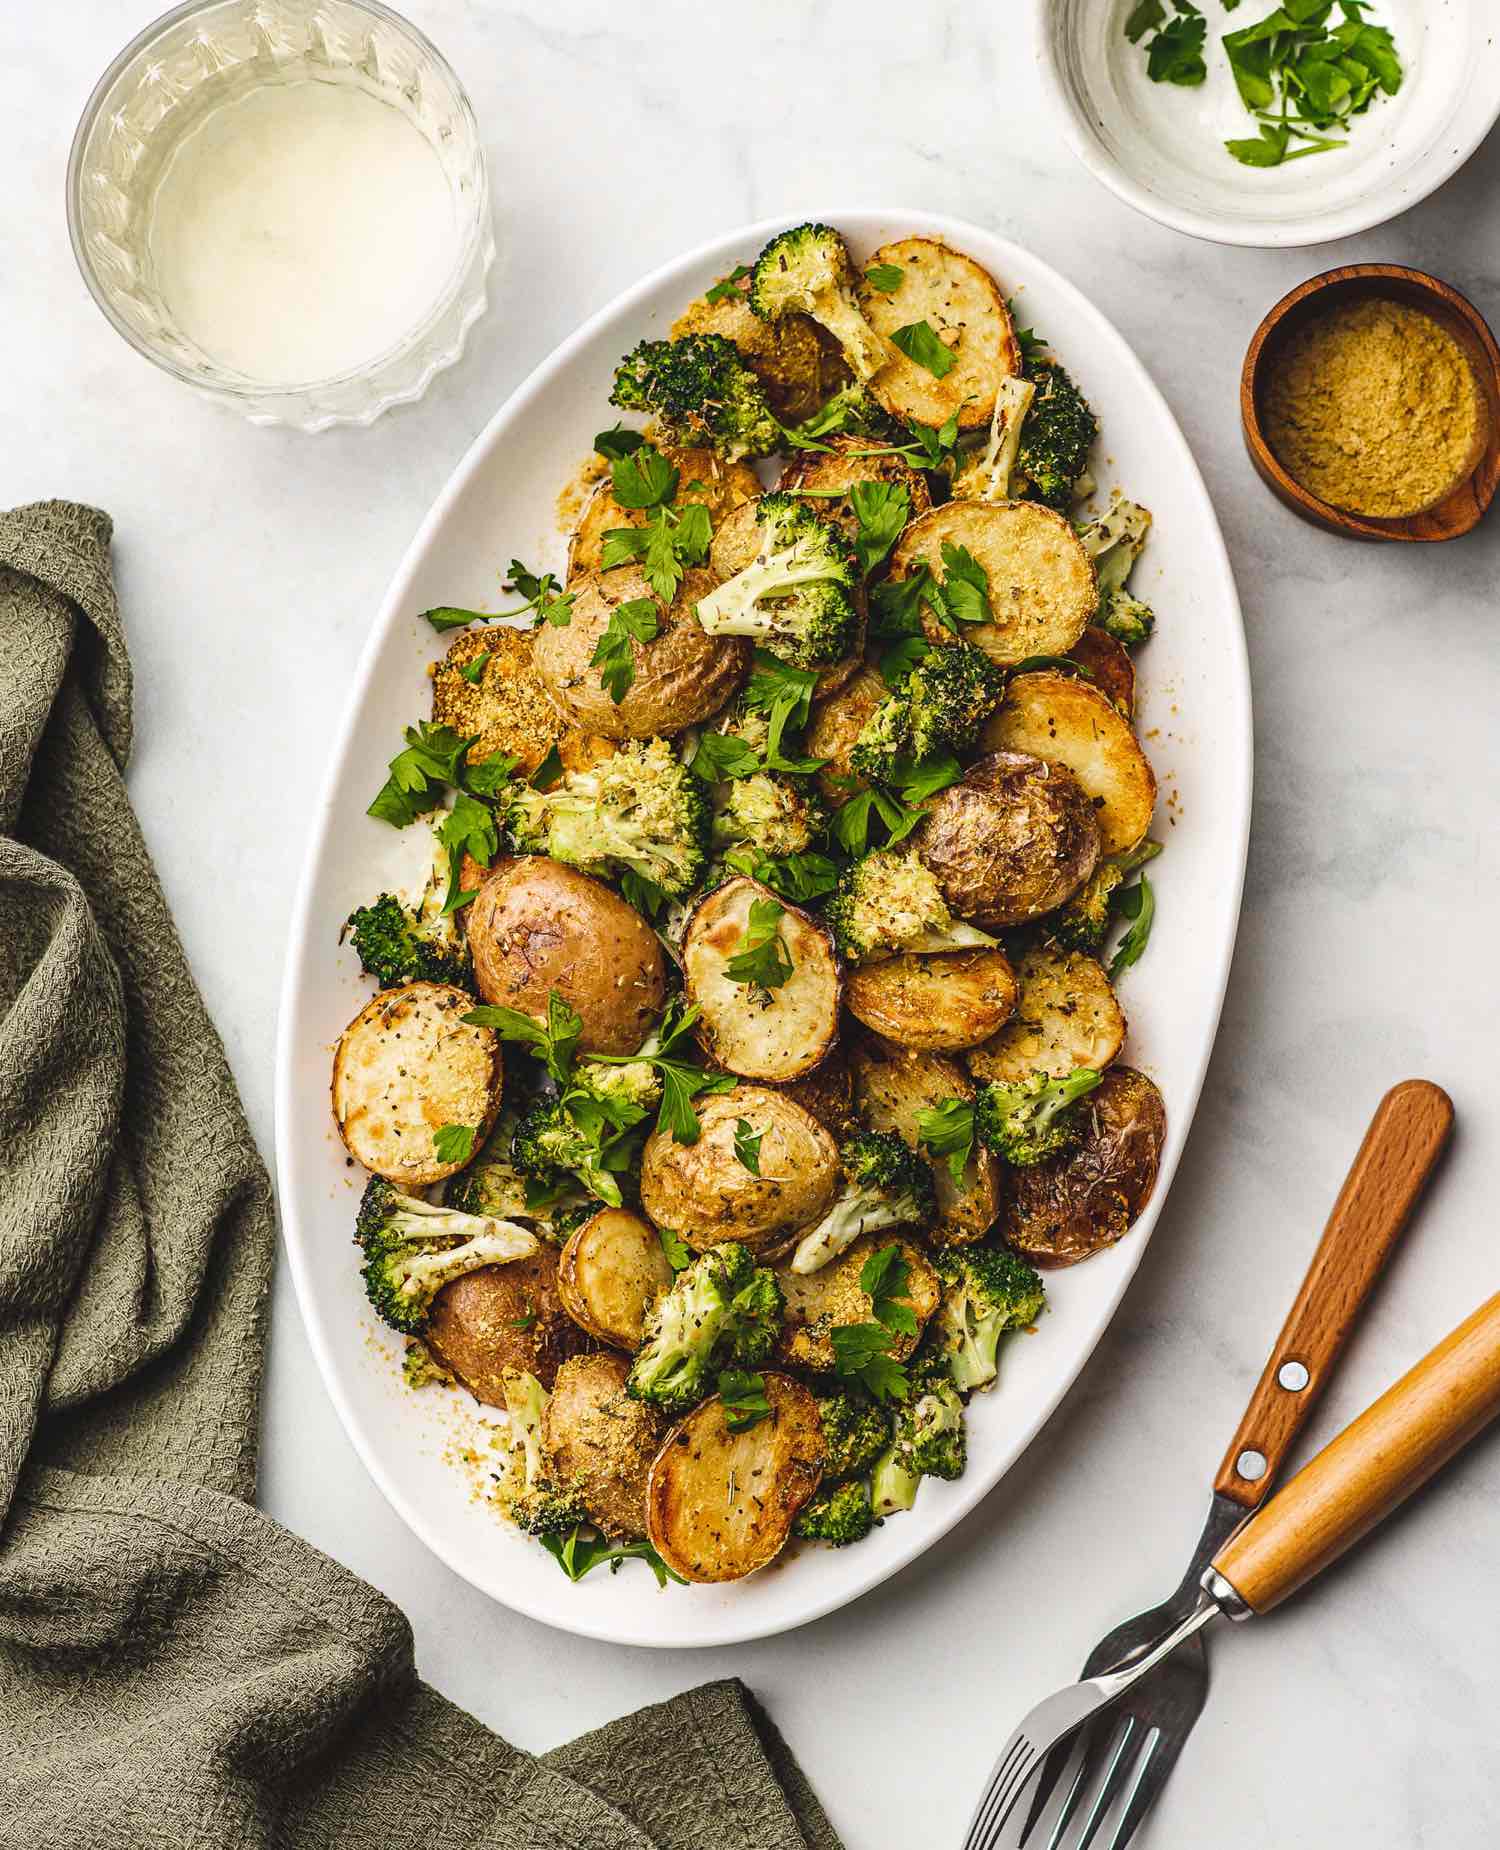 Vegan Cheesy Garlic Roasted Potatoes and Broccoli on a Platter Garnished with Parsley